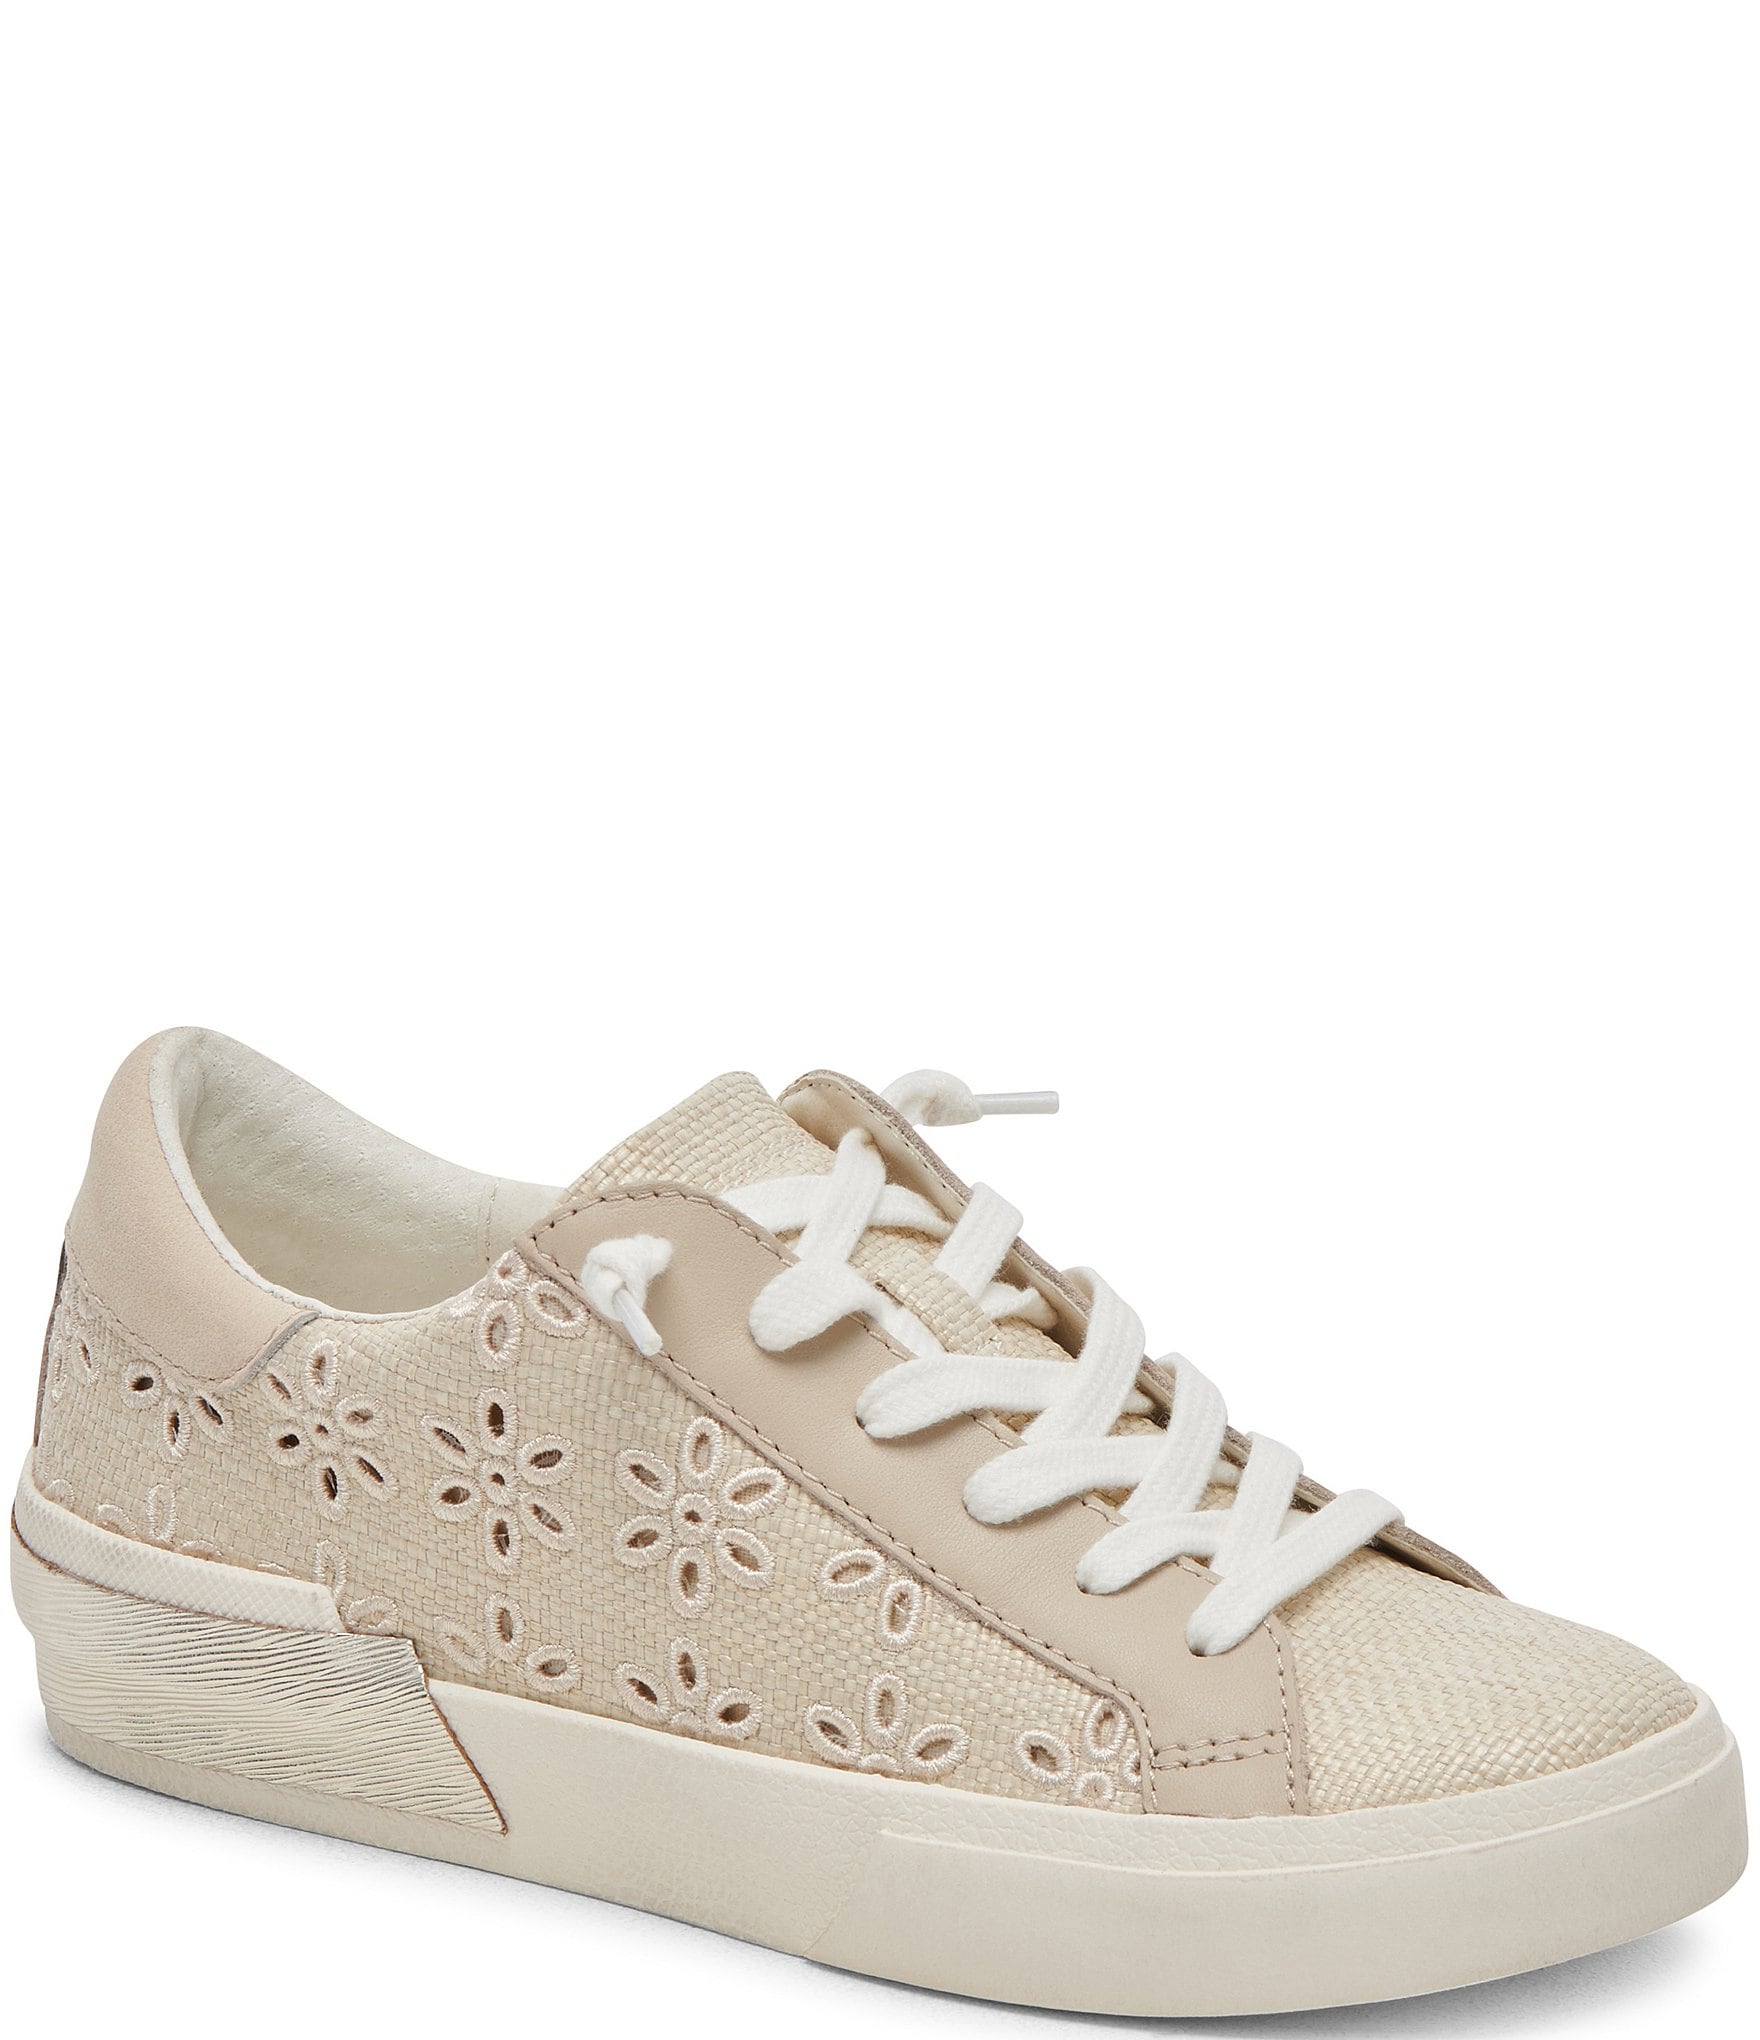 Discover 209+ eyelet slip on sneakers super hot